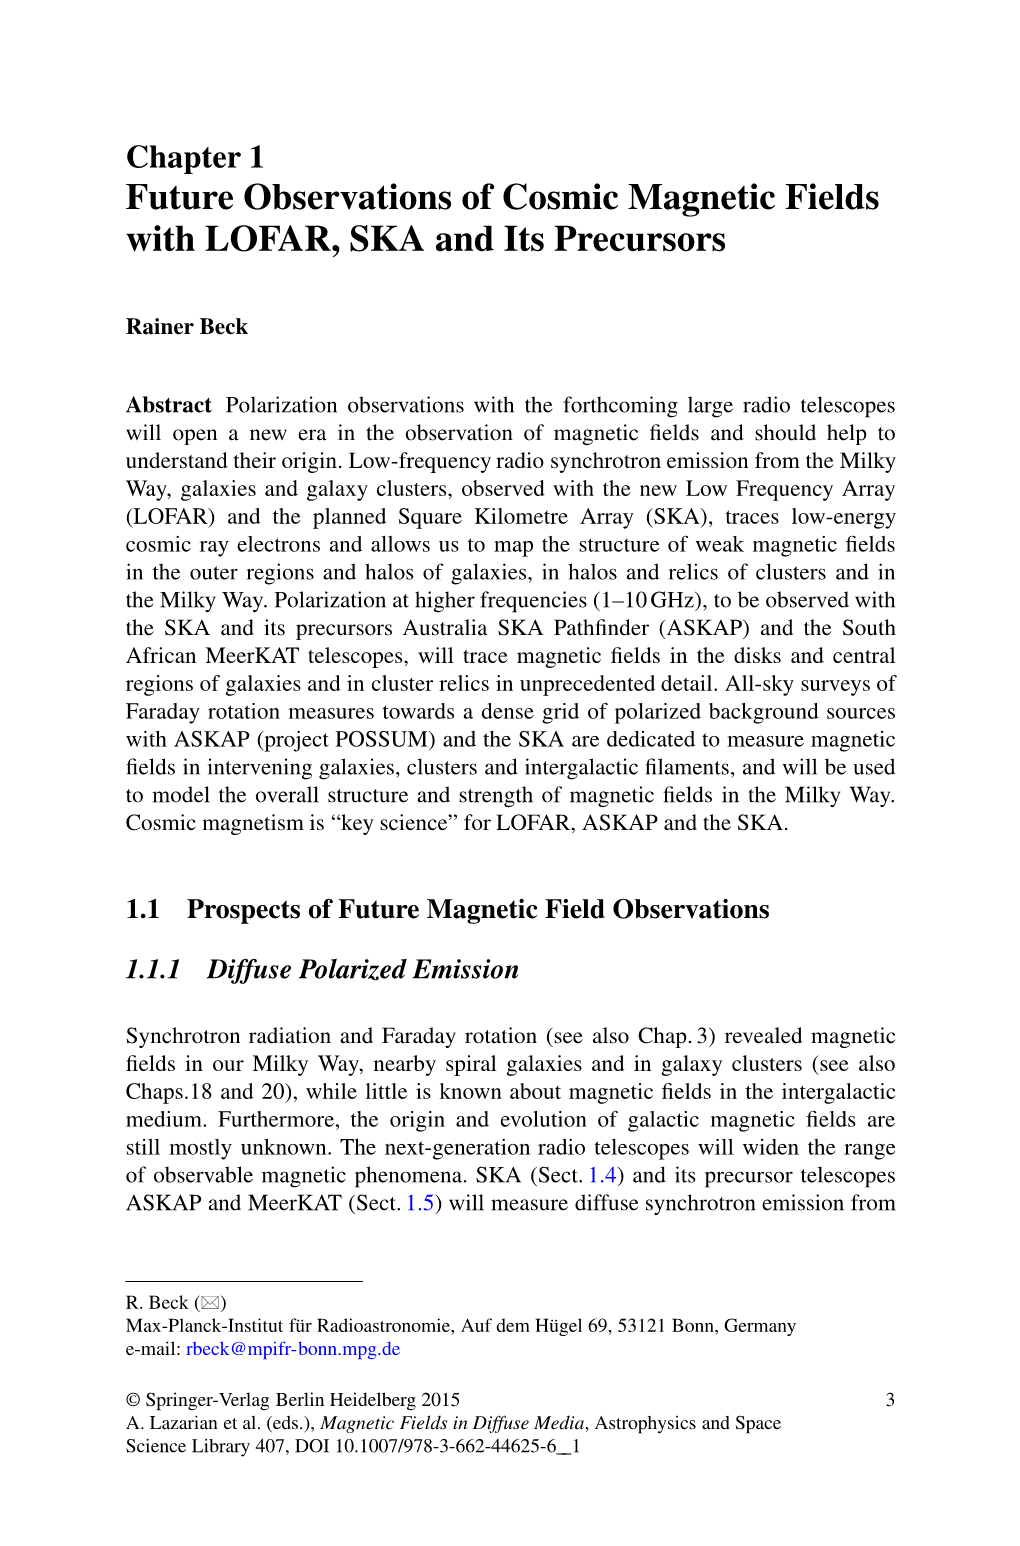 Future Observations of Cosmic Magnetic Fields with LOFAR, SKA and Its Precursors